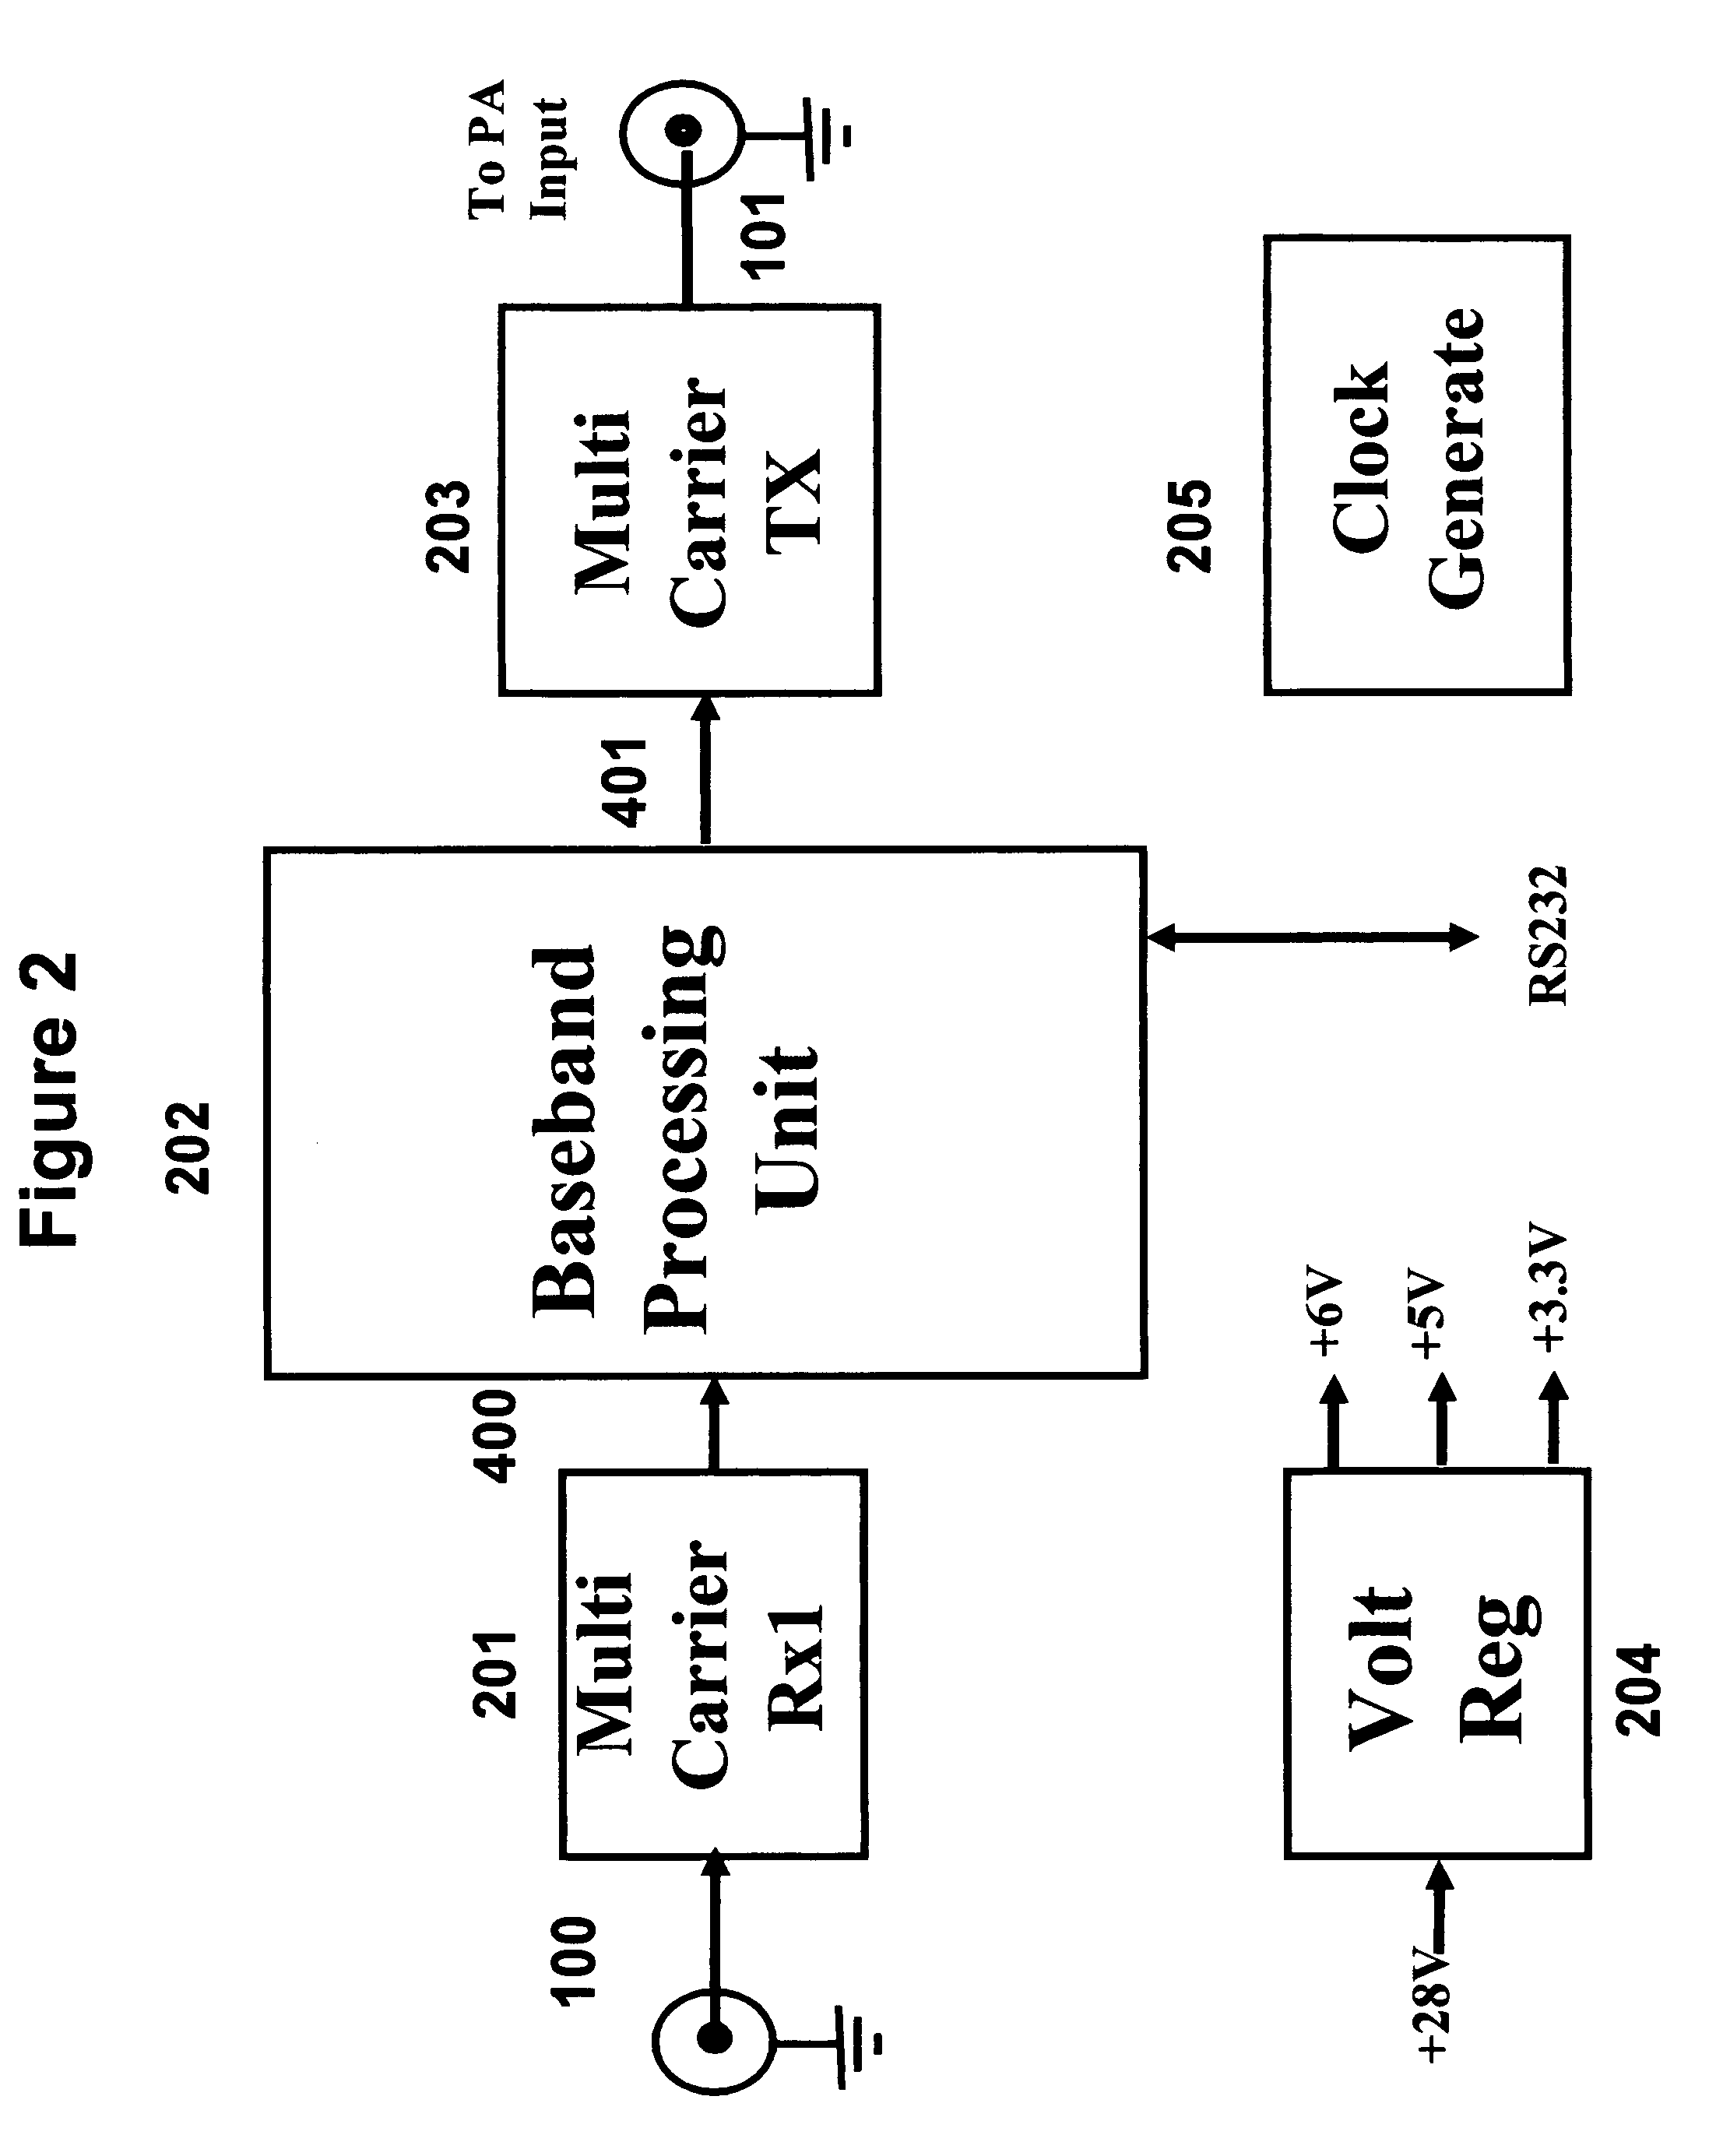 Peak suppression of multi-carrier signal with different modulation